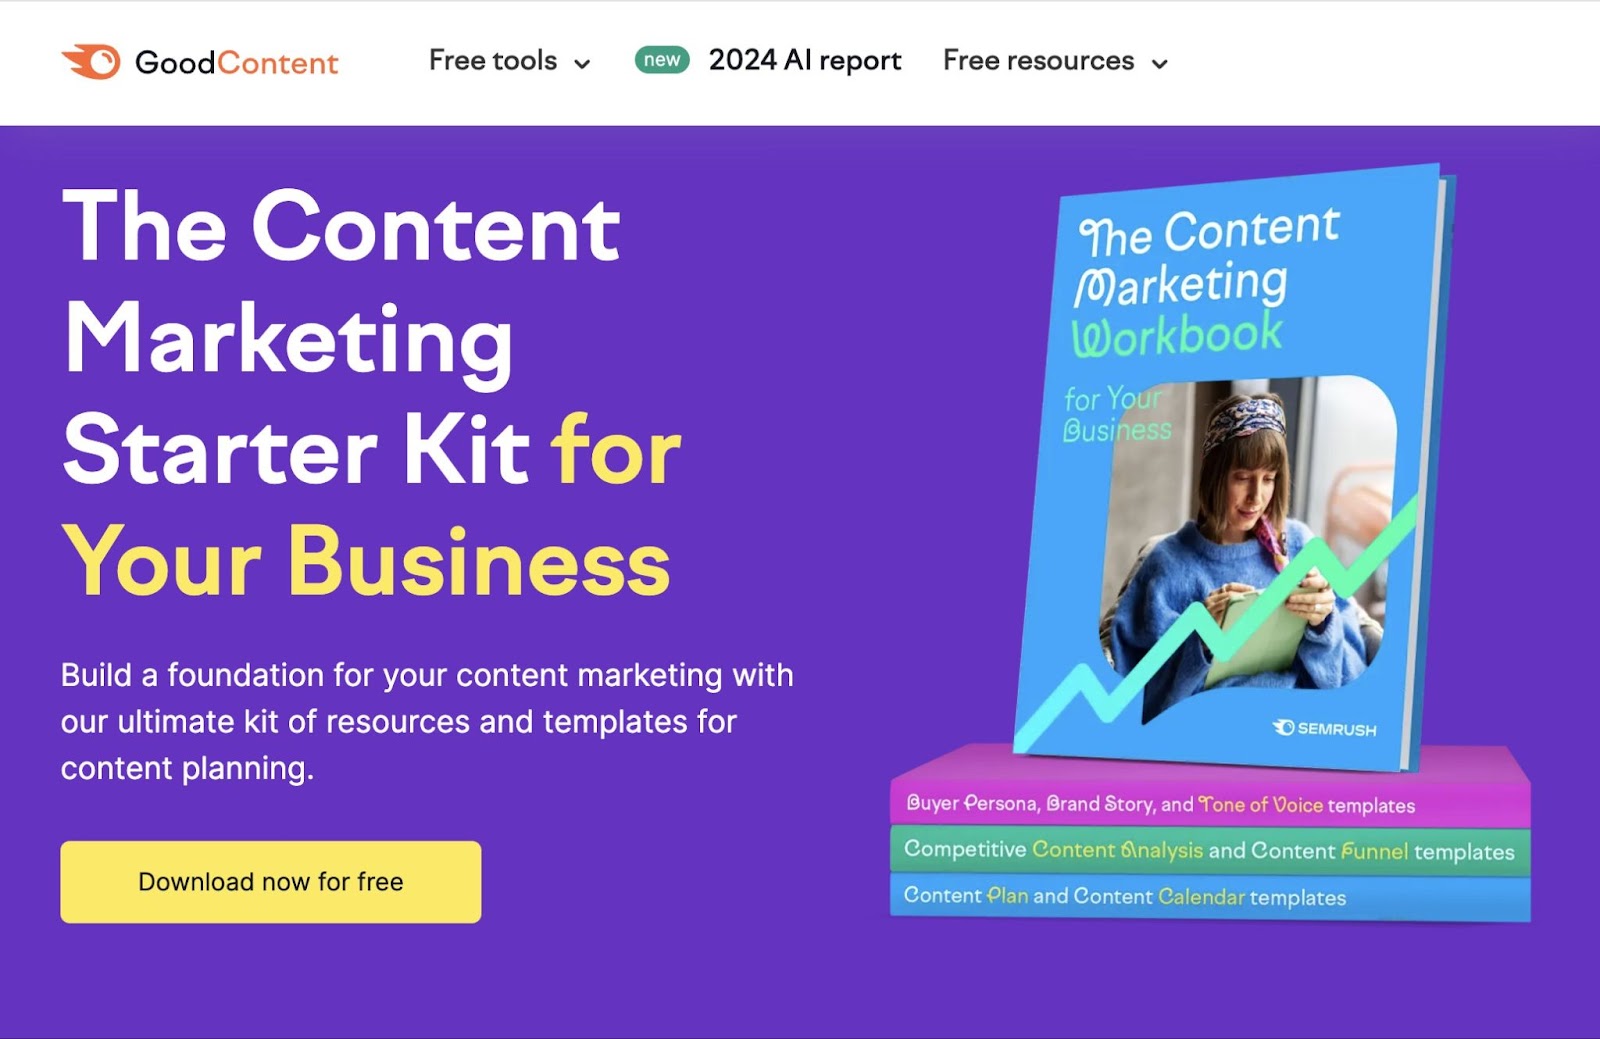 Semrush's The Content Marketing Starter Kit for Your Business ebook page